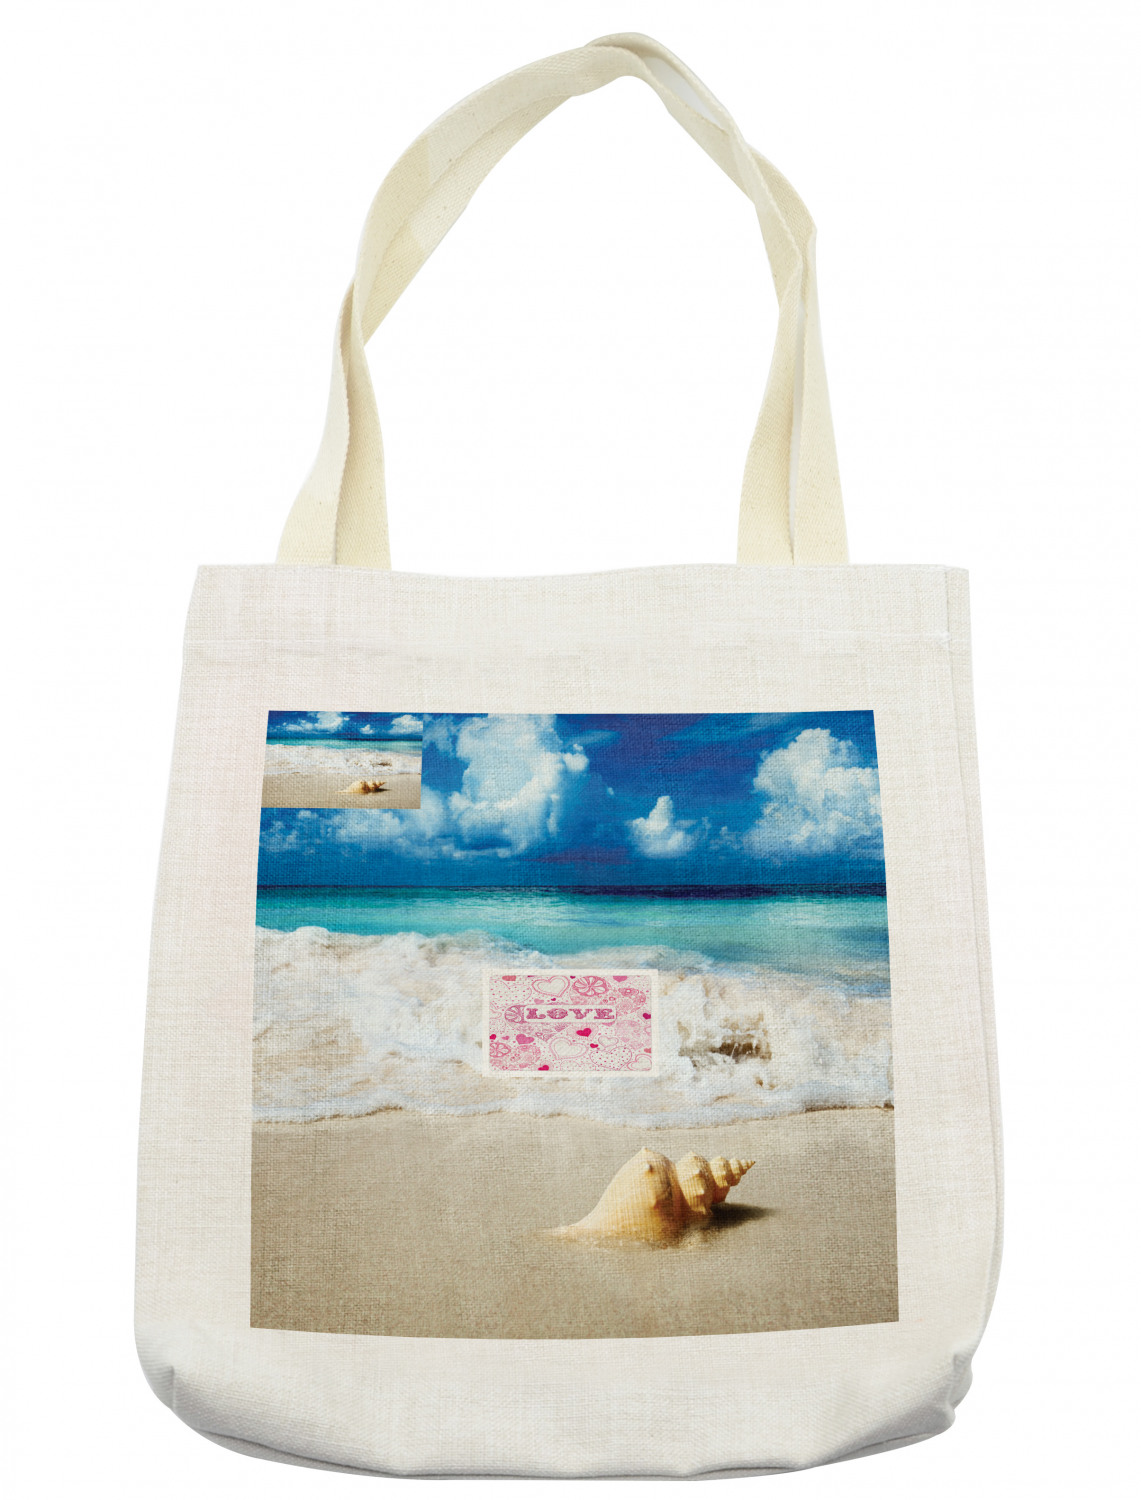 Details about   Ambesonne Colorful Scene Tote Bag Reusable Linen Sack Shopping Books Beach 